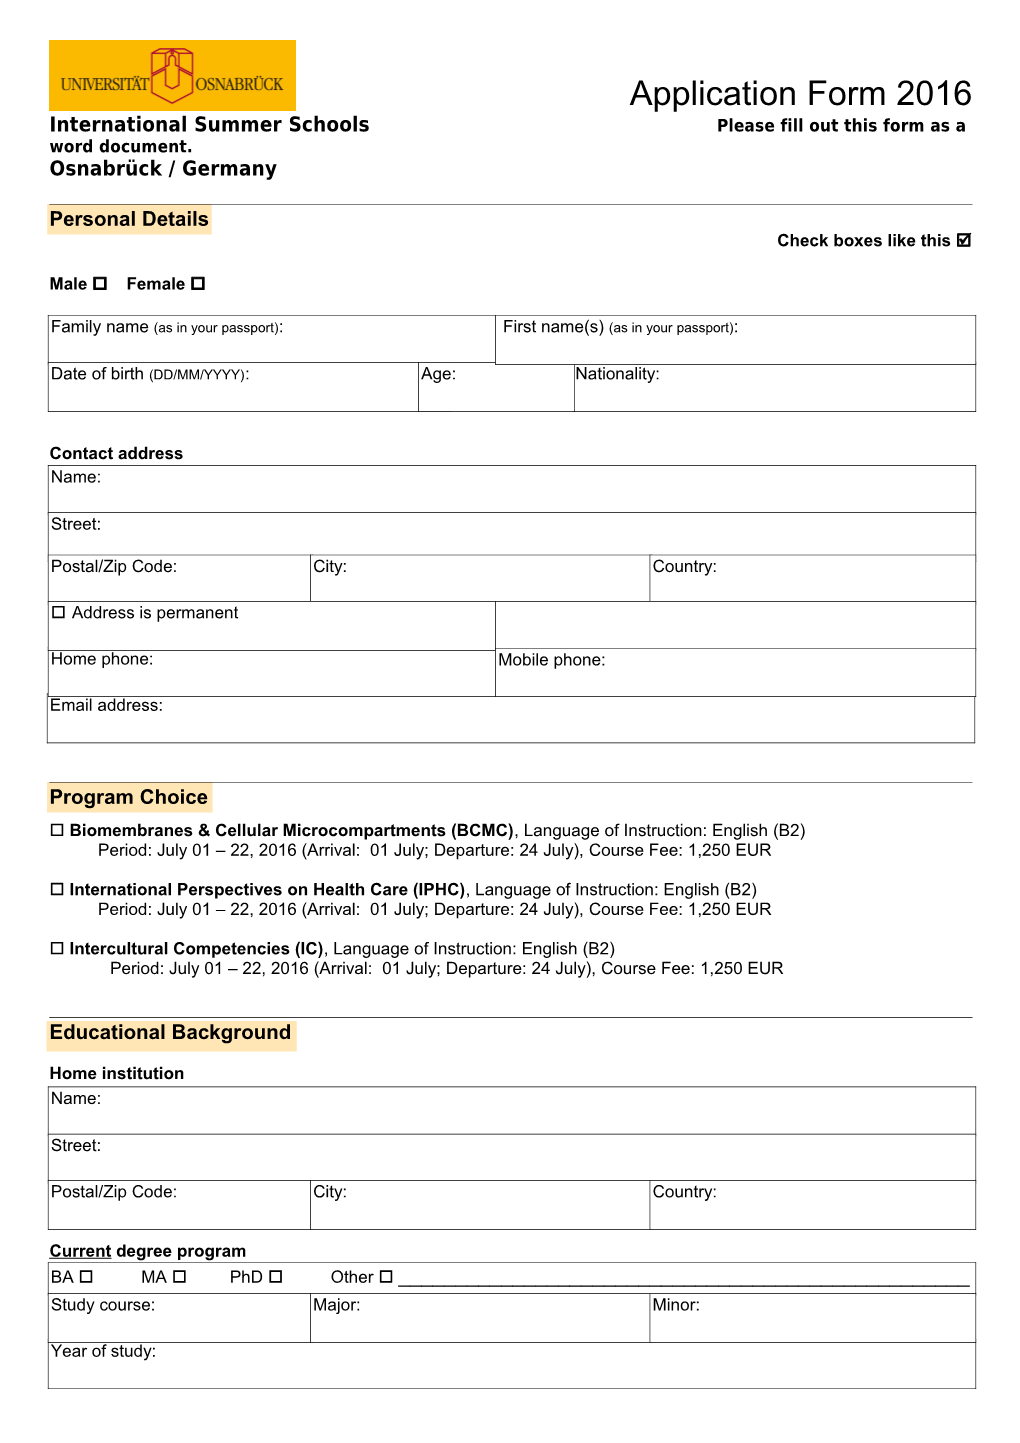 International Summer Schoolsplease Fill out This Form As a Word Document